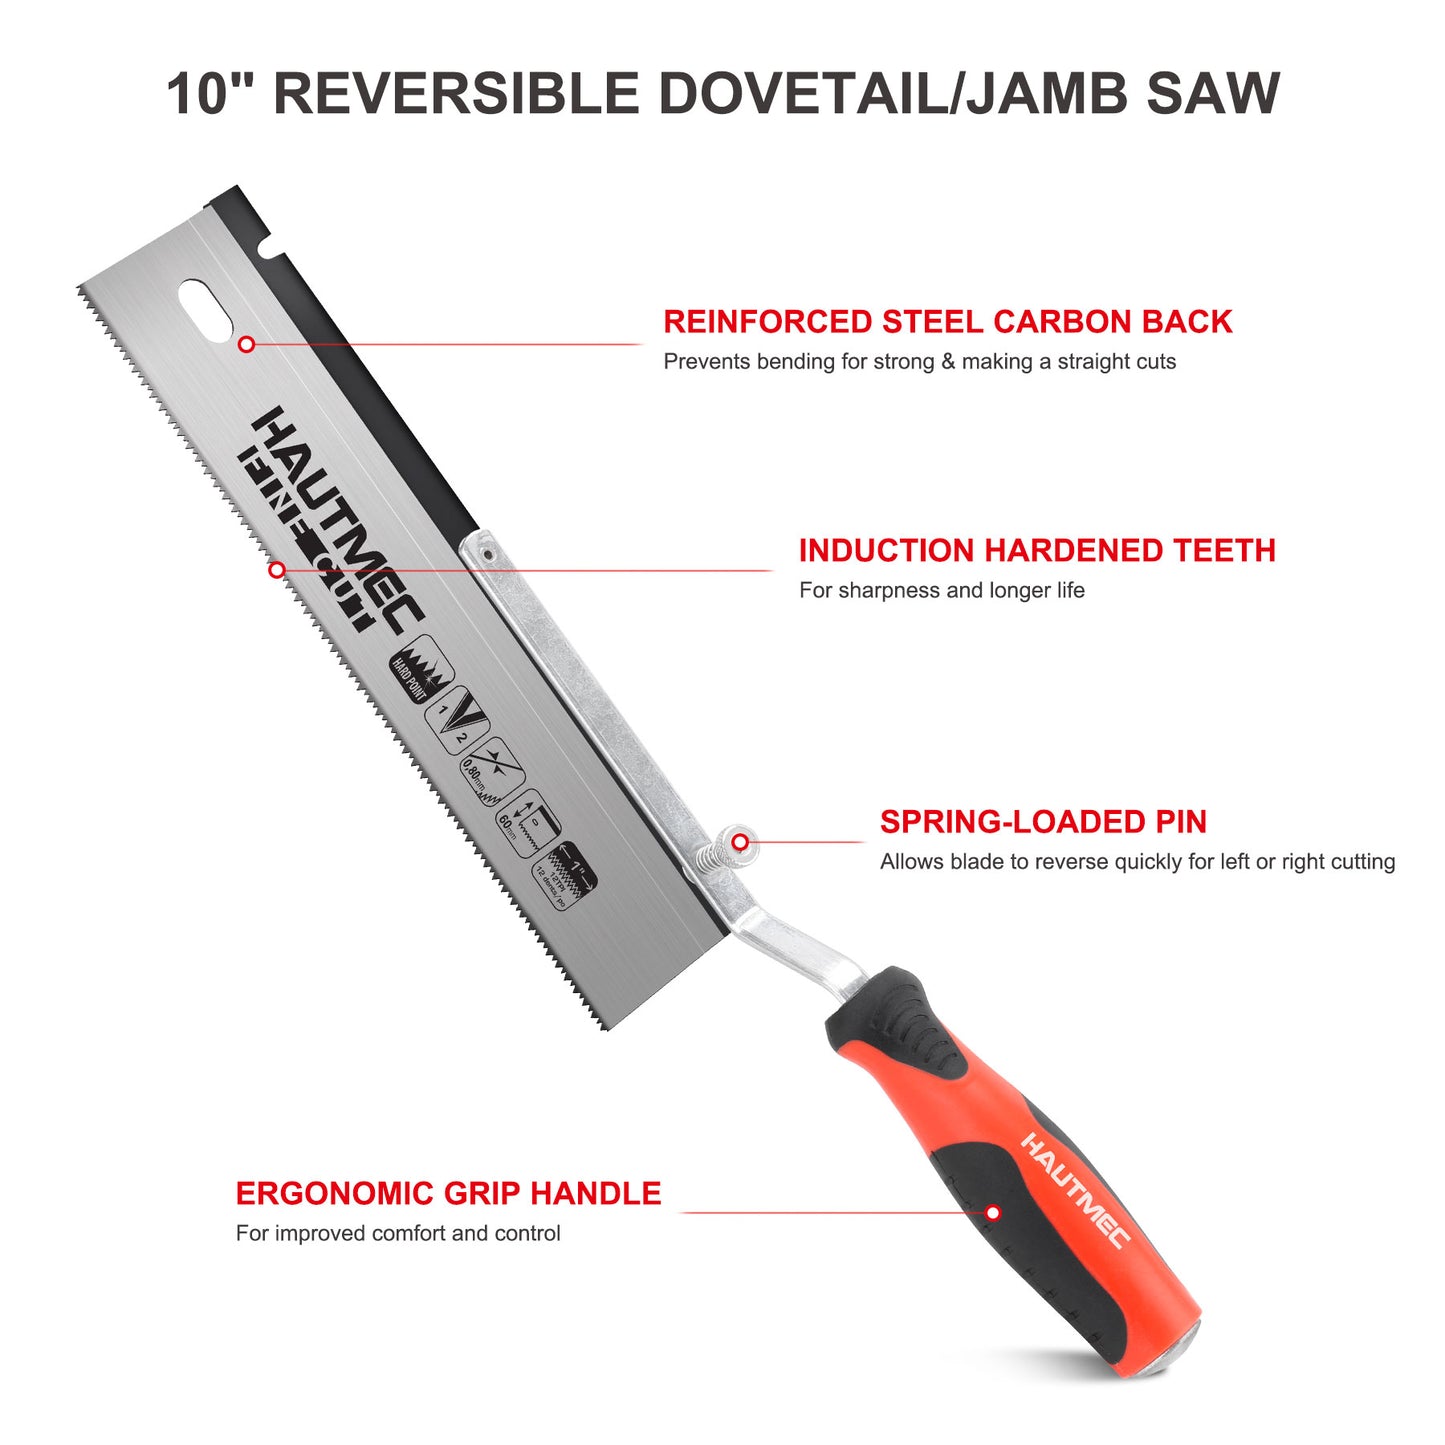 HAUTMEC 10" Reversible Dovetail/Jamb Saw, 12TPI Double Ground Teeth with Spring Loaded Design & Cranked Soft Handle for flush-cutting door jambs and millwork for tile installation and prep